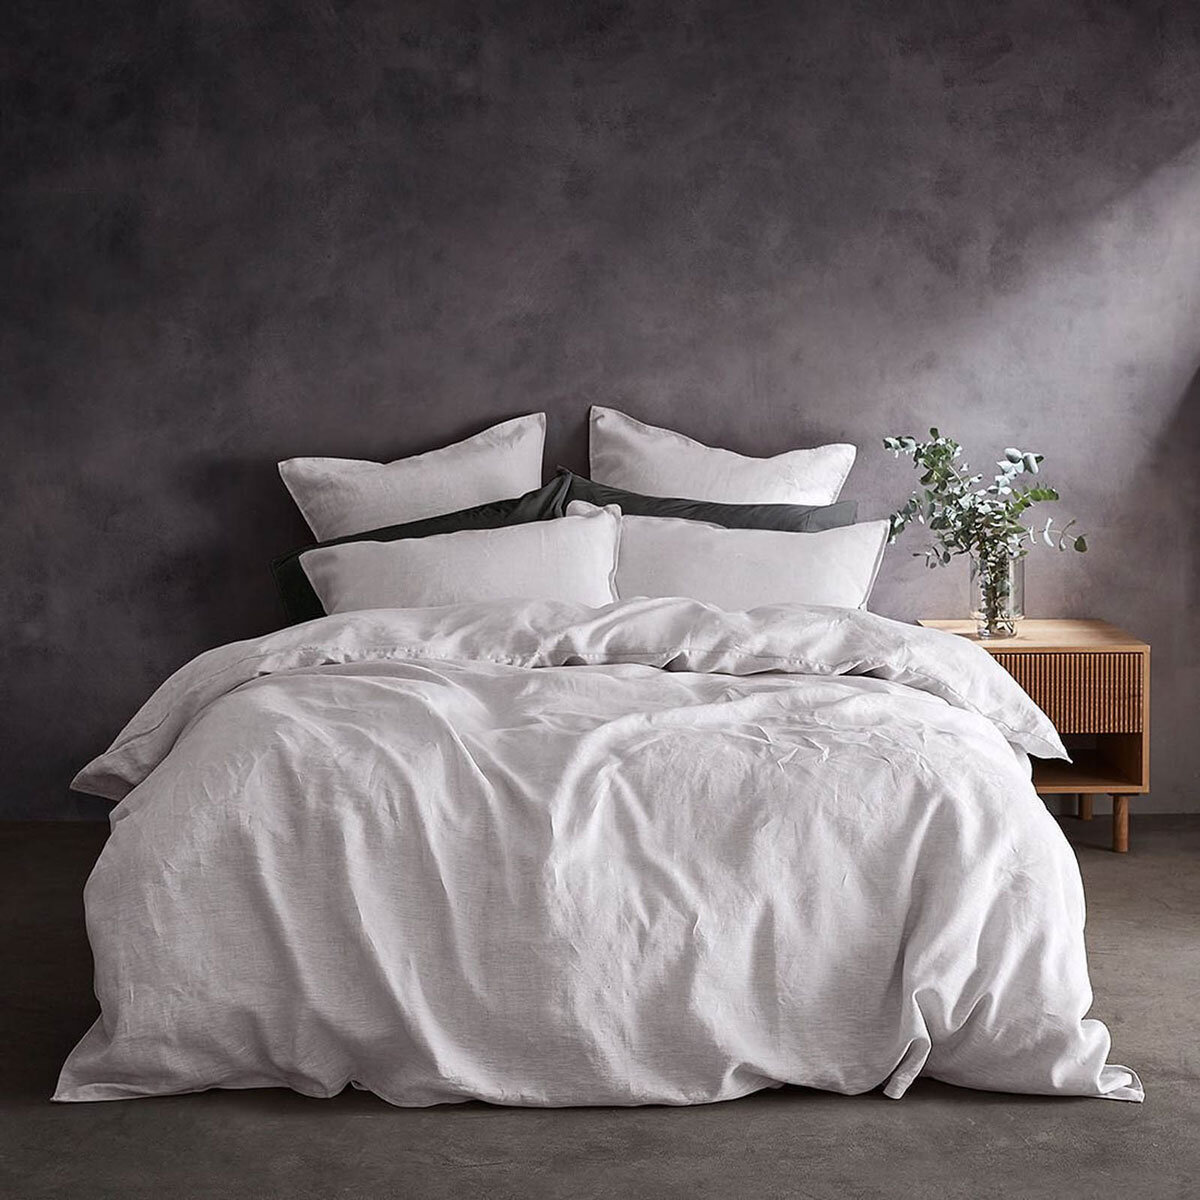 Lifestyle image of Lazy Linen bedding in White